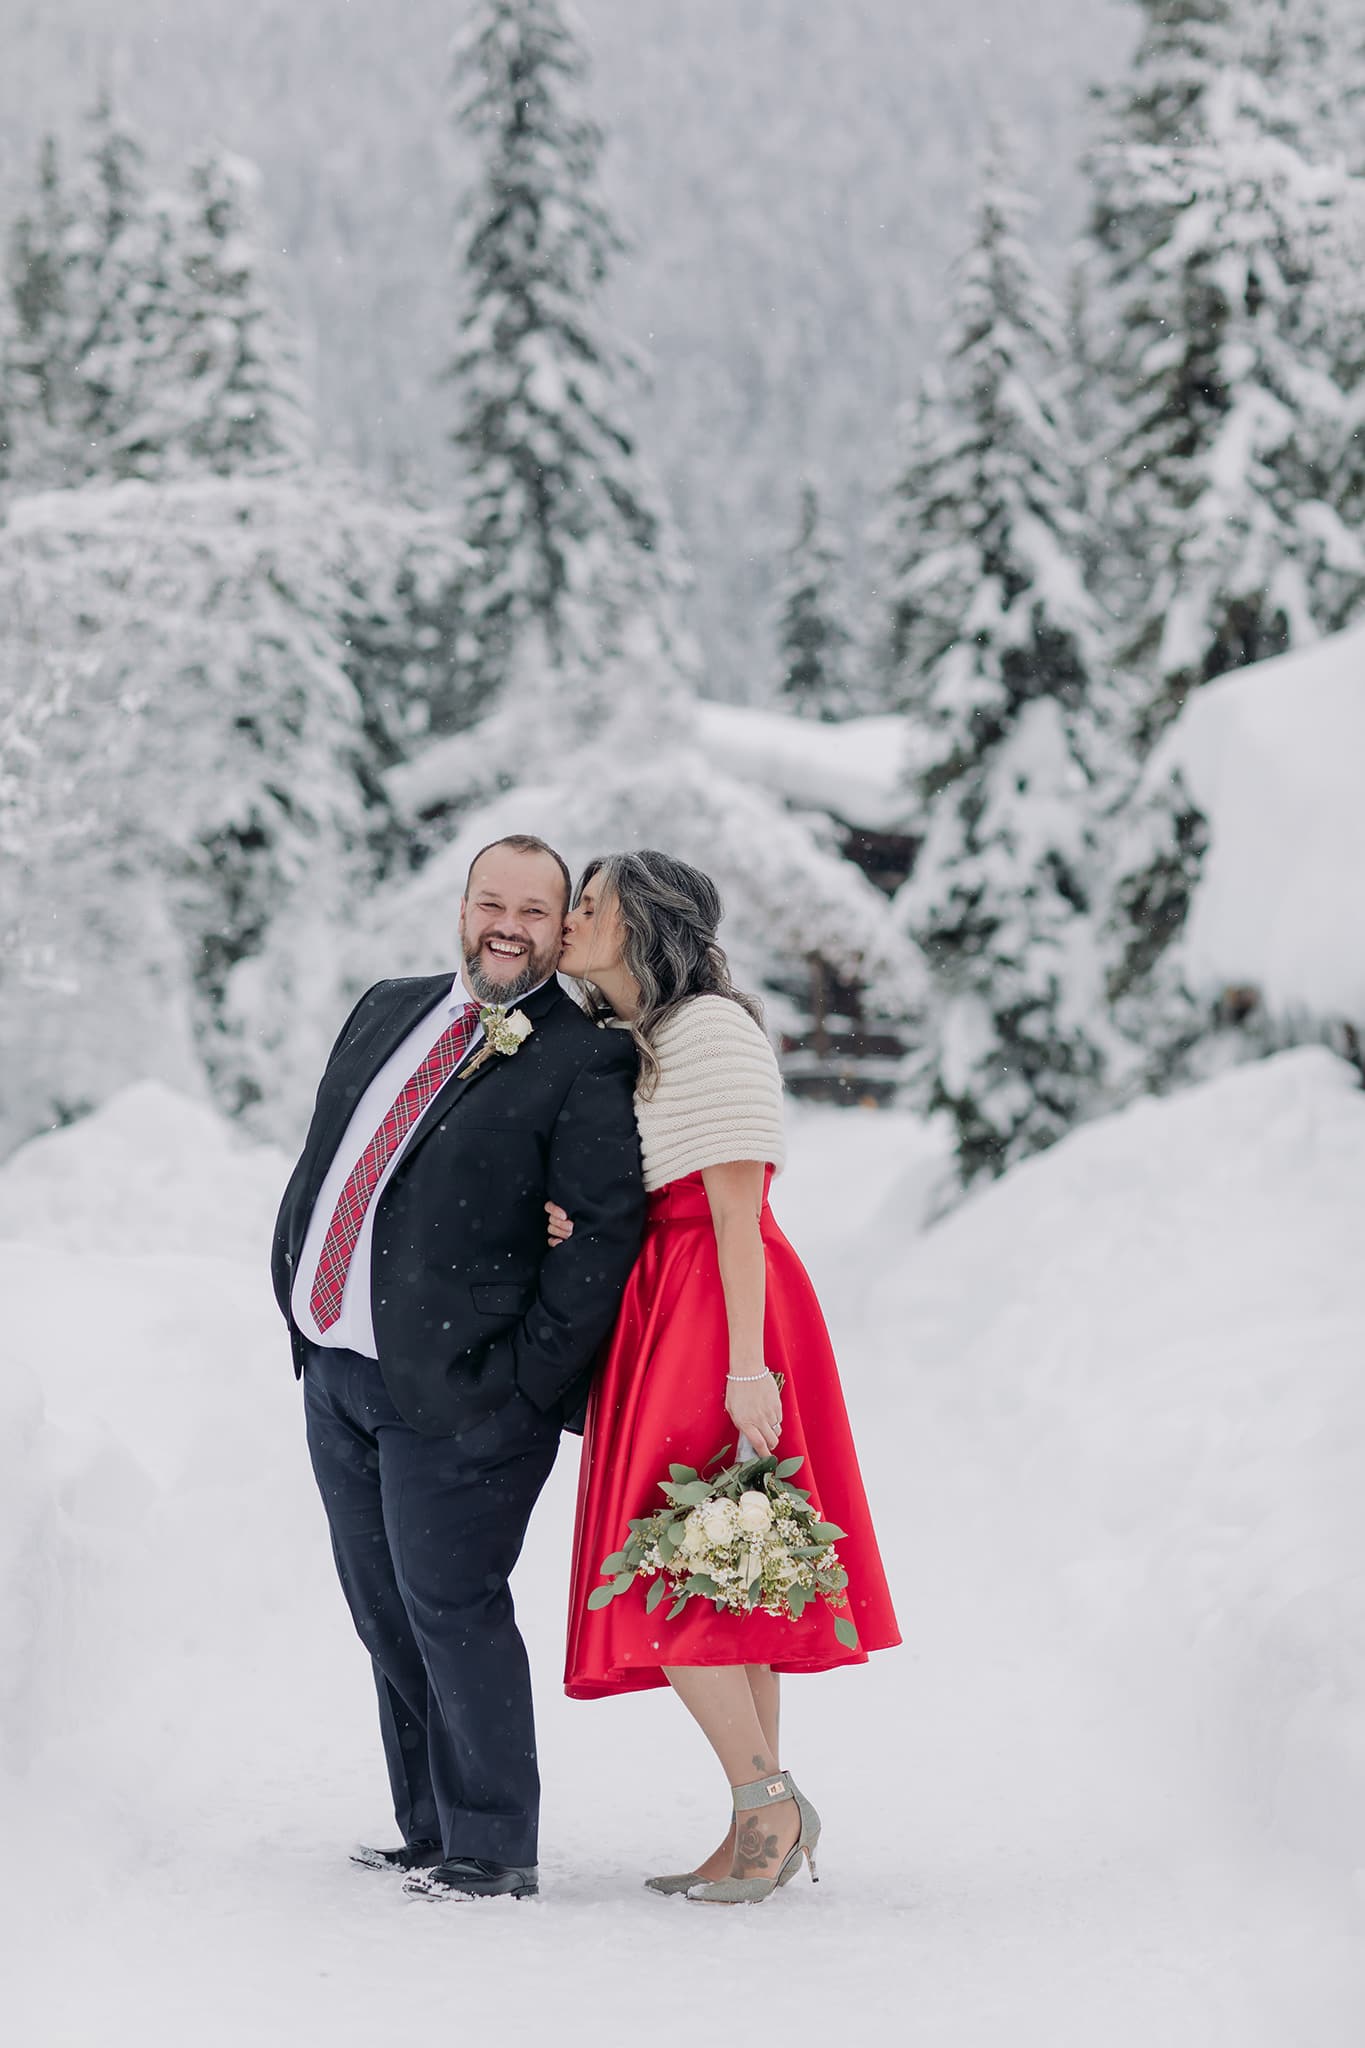 winter outdoor wedding ceremony at Emerald Lake Lodge